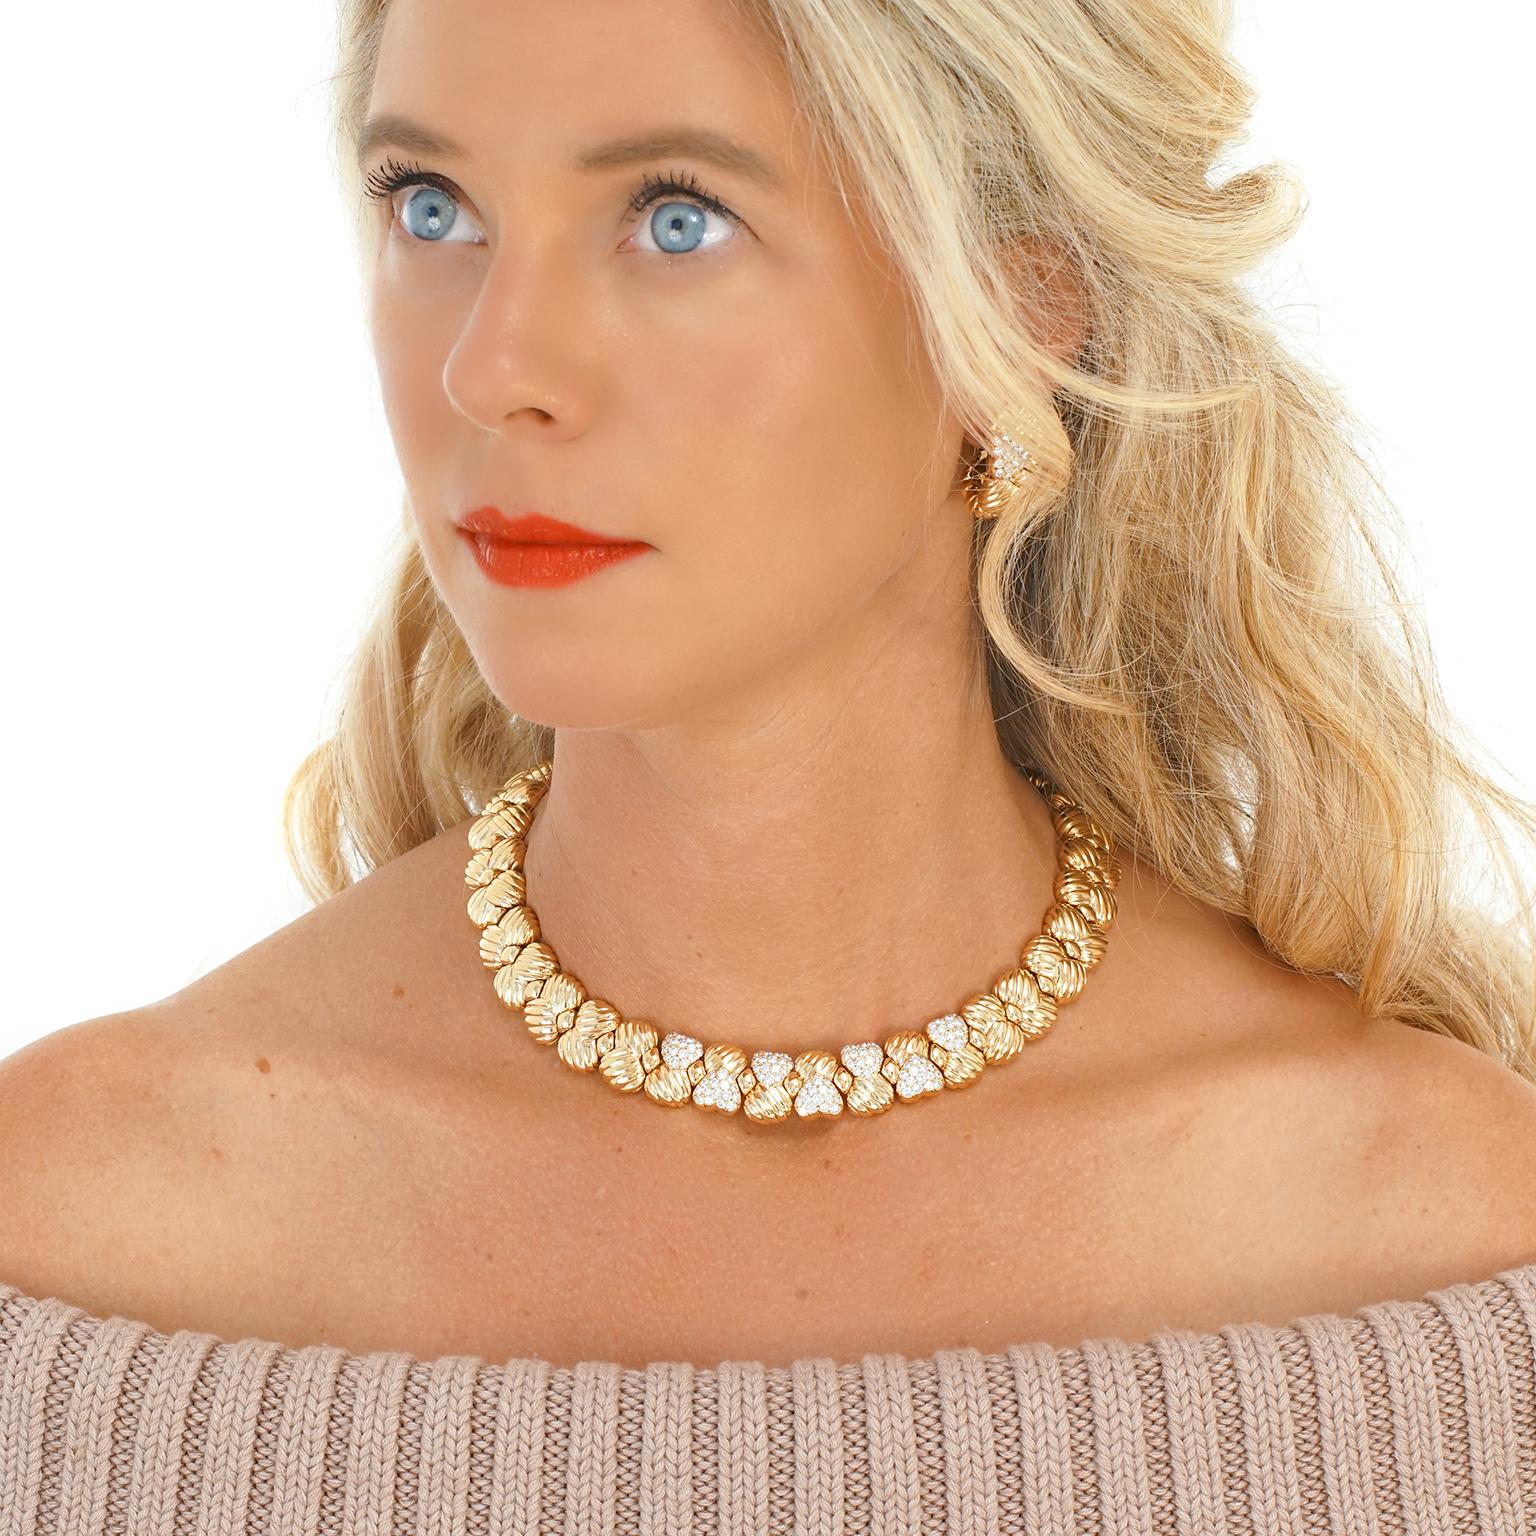 Circa 1970s, 18k, by Boucheron, Paris, France. This ultra-chic diamond-set yellow gold necklace by the storied house of Boucheron features an understated heart motif. The look is vintage sixties French jewelry at its fashionable Parisian best. The